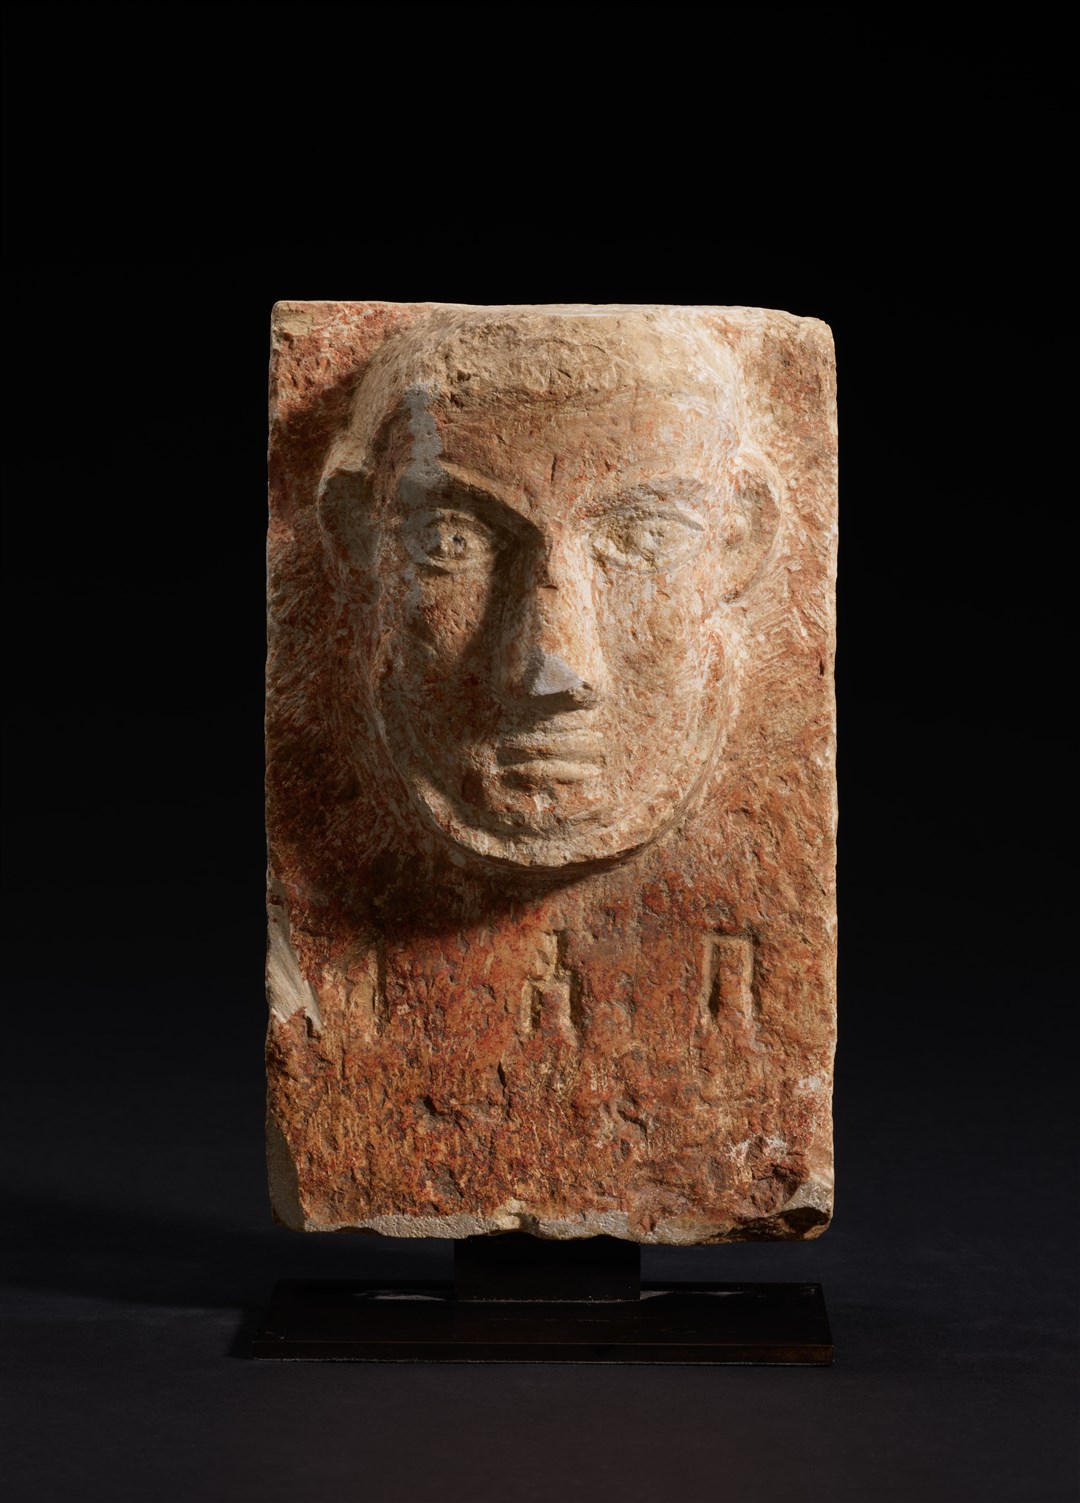 The V&A announces a historic agreement with the Republic of Yemen to research and temporarily care for four ancient carved stone funerary stelae, which were likely illegally looted from the Republic of Yemen, ahead of their safe return to their country of origin. The objects, likely dating from the second half of the first millennium BCE, will go on display at V&A East Storehouse from 2025 (Victoria and Albert Museum London)